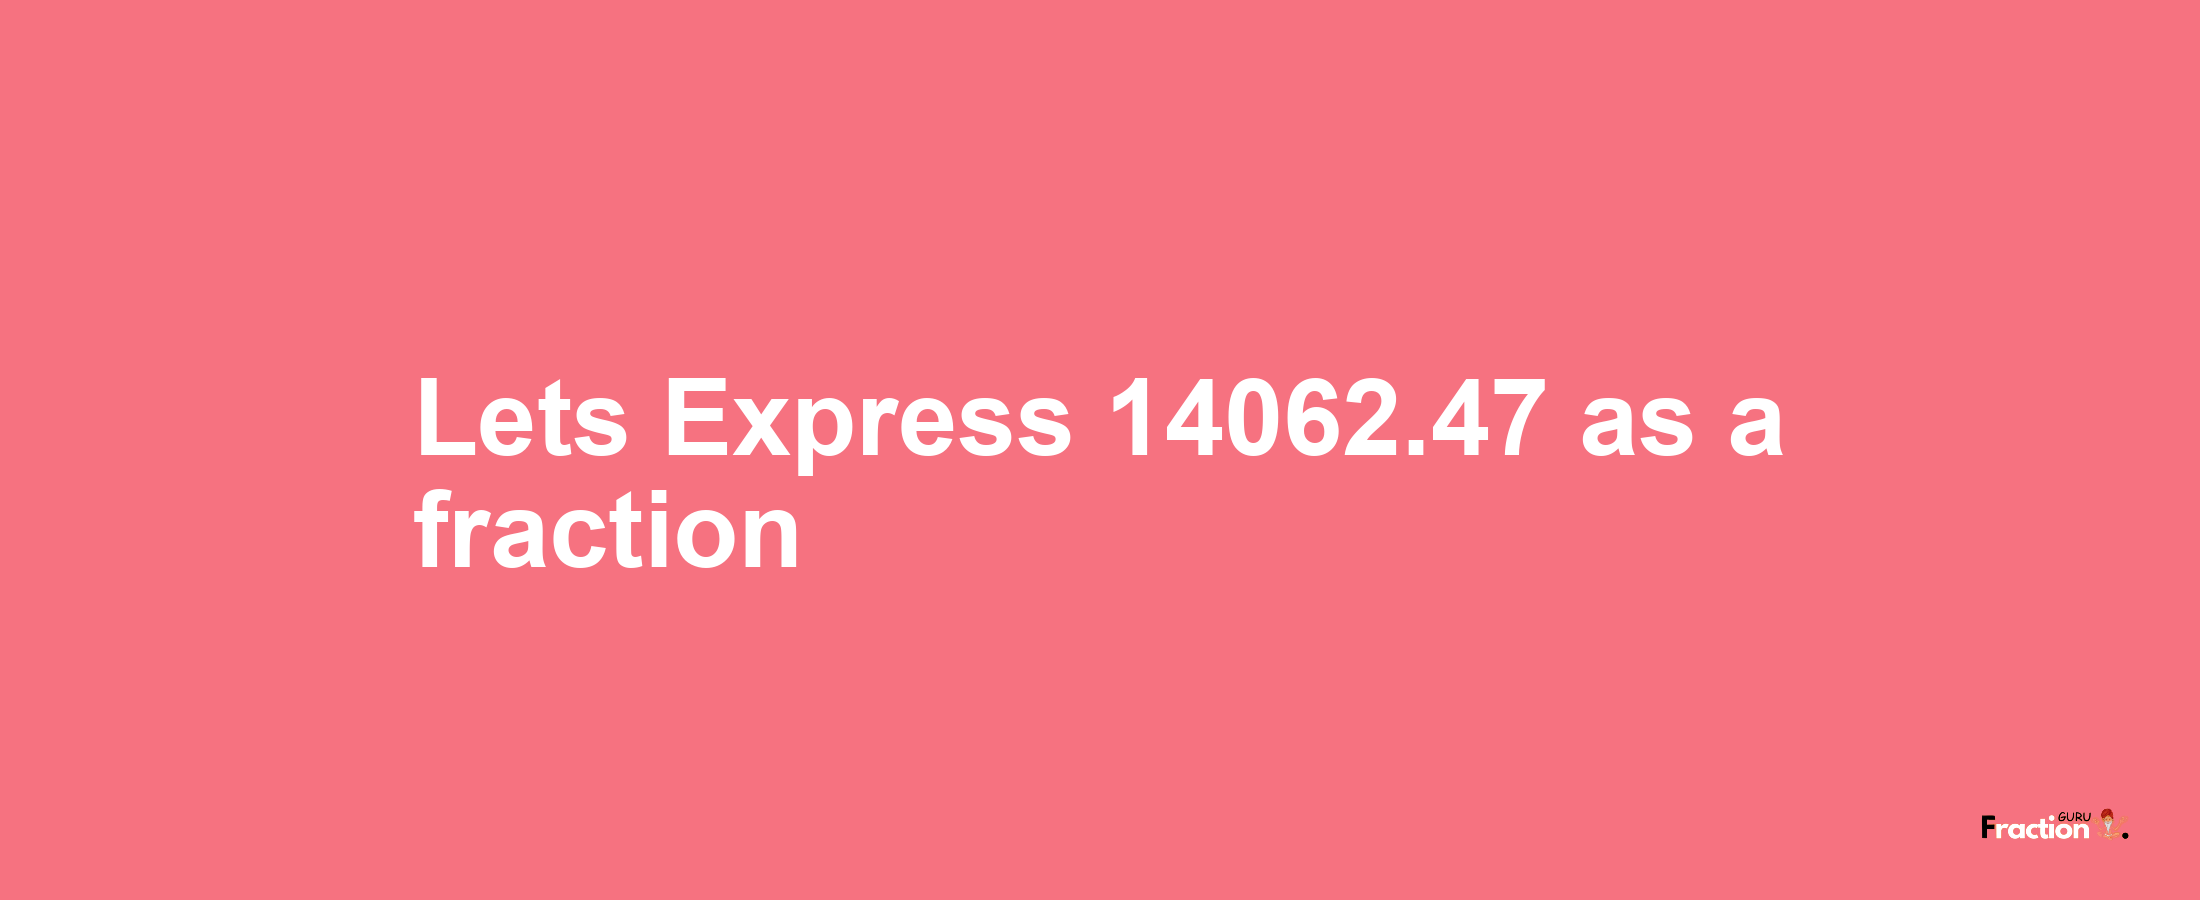 Lets Express 14062.47 as afraction